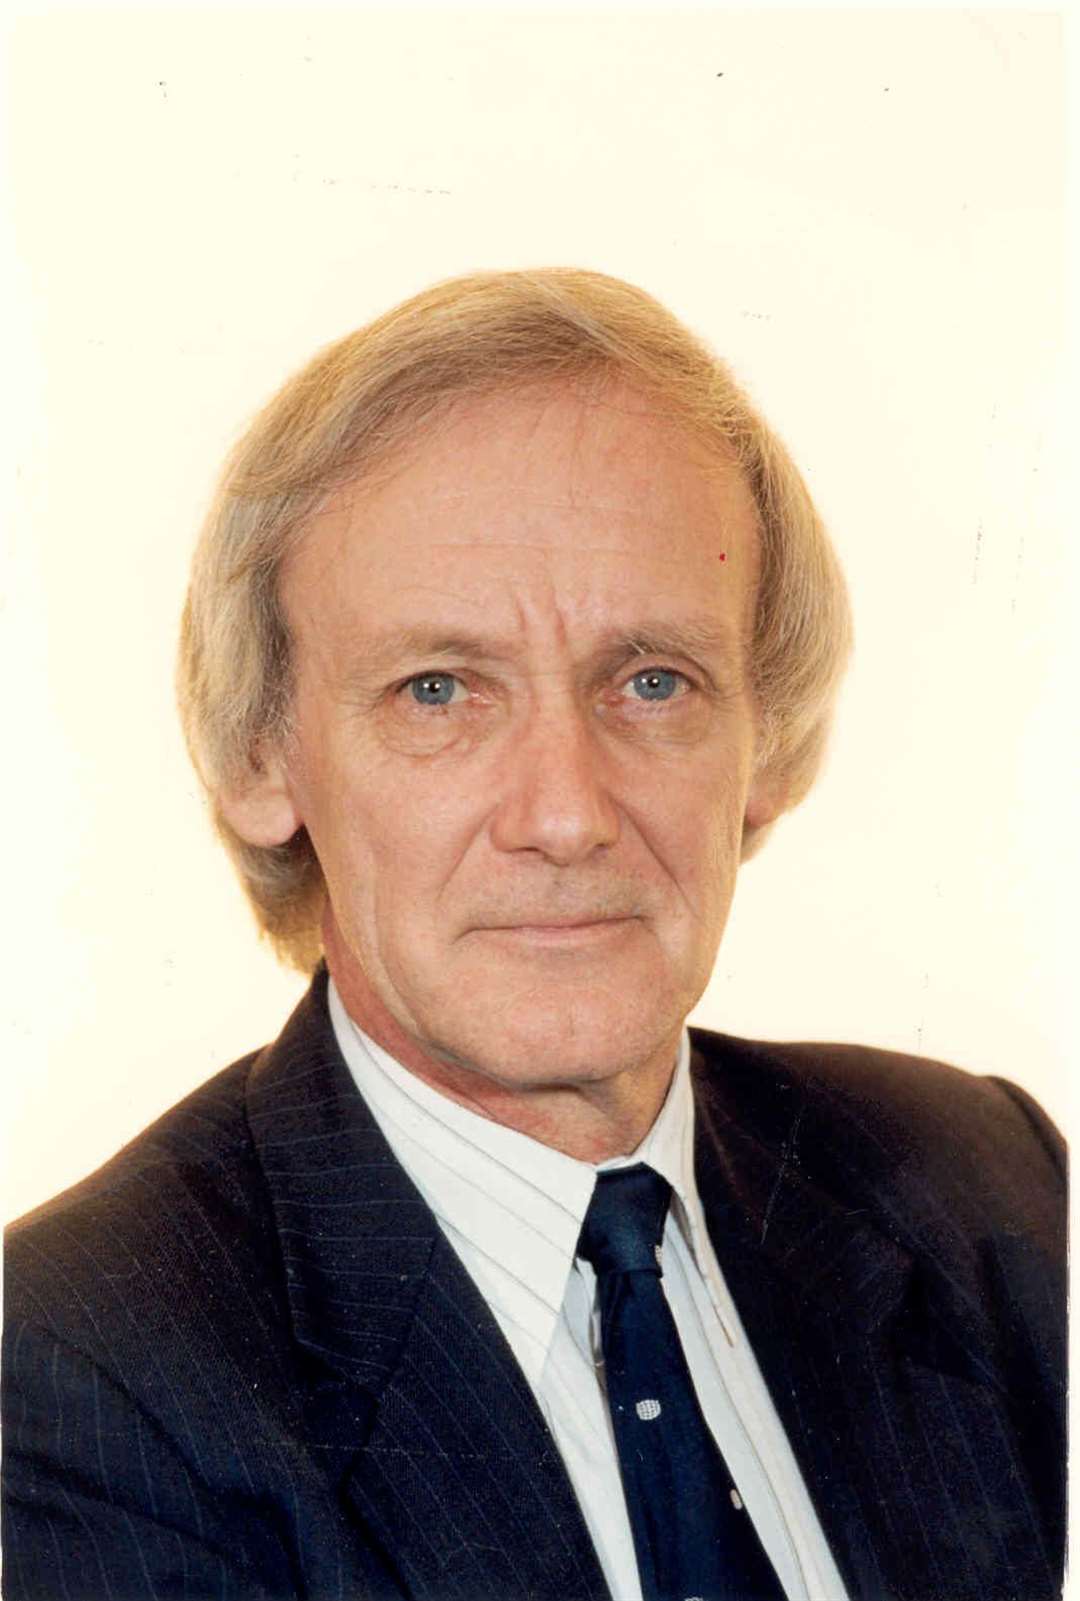 Norman Smith, pictured here in 1994, became the KM Group's managing editor and the company's legal adviser after his retirement in 2000